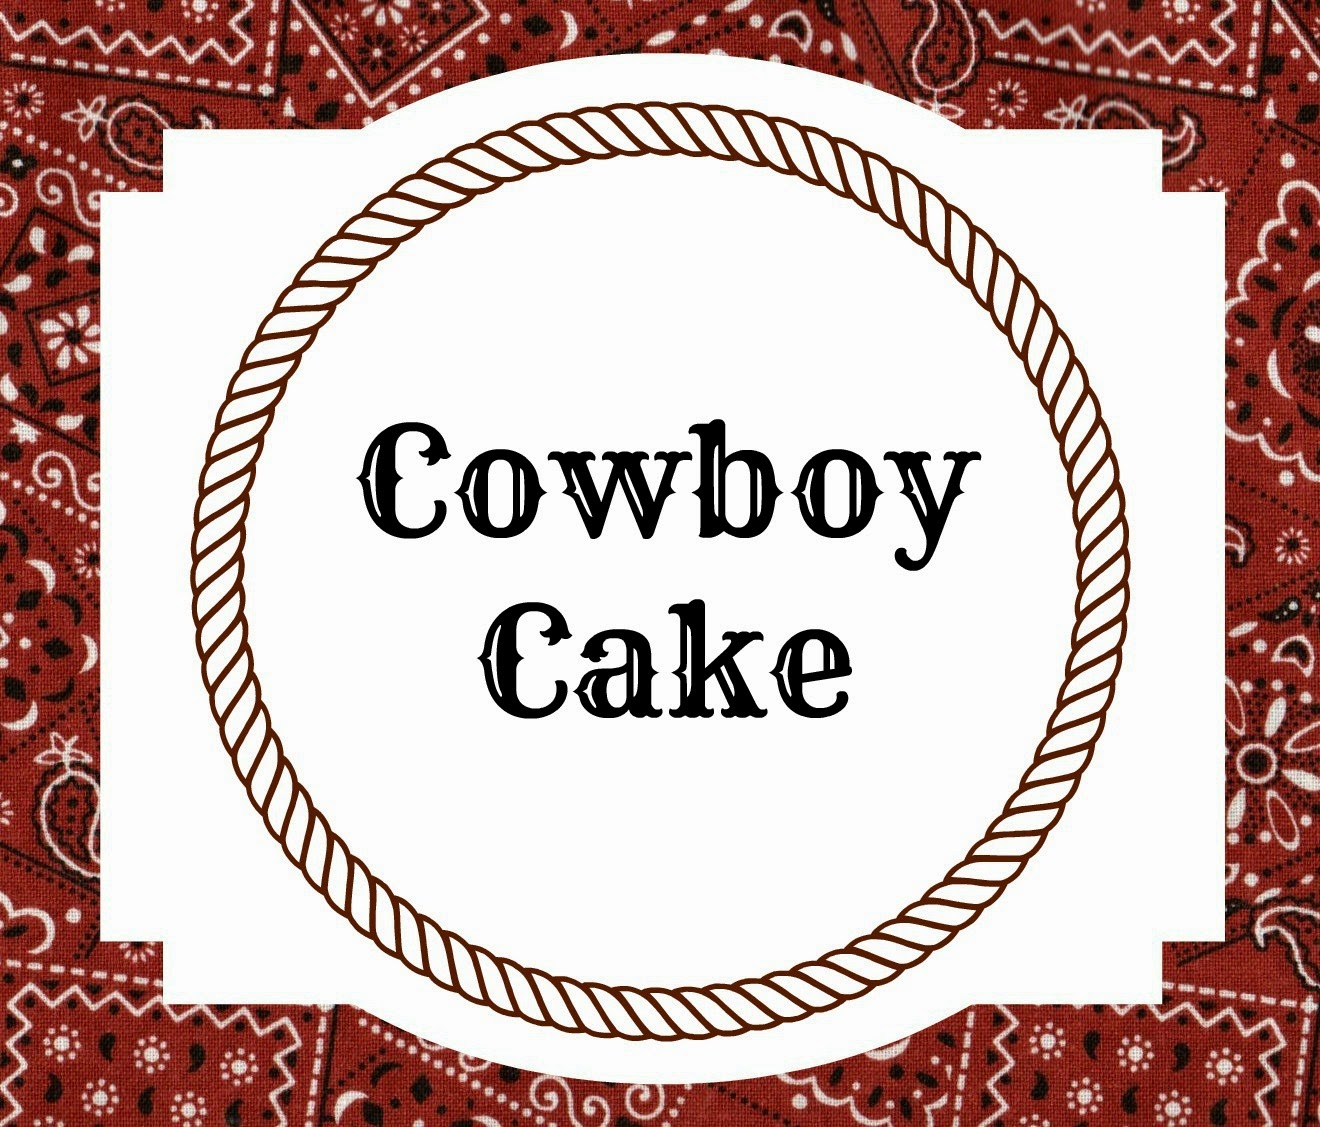 FREE Printable Food Labels for Western-Themed Party | Apples to Applique #party #cowboy #cowgirl #western